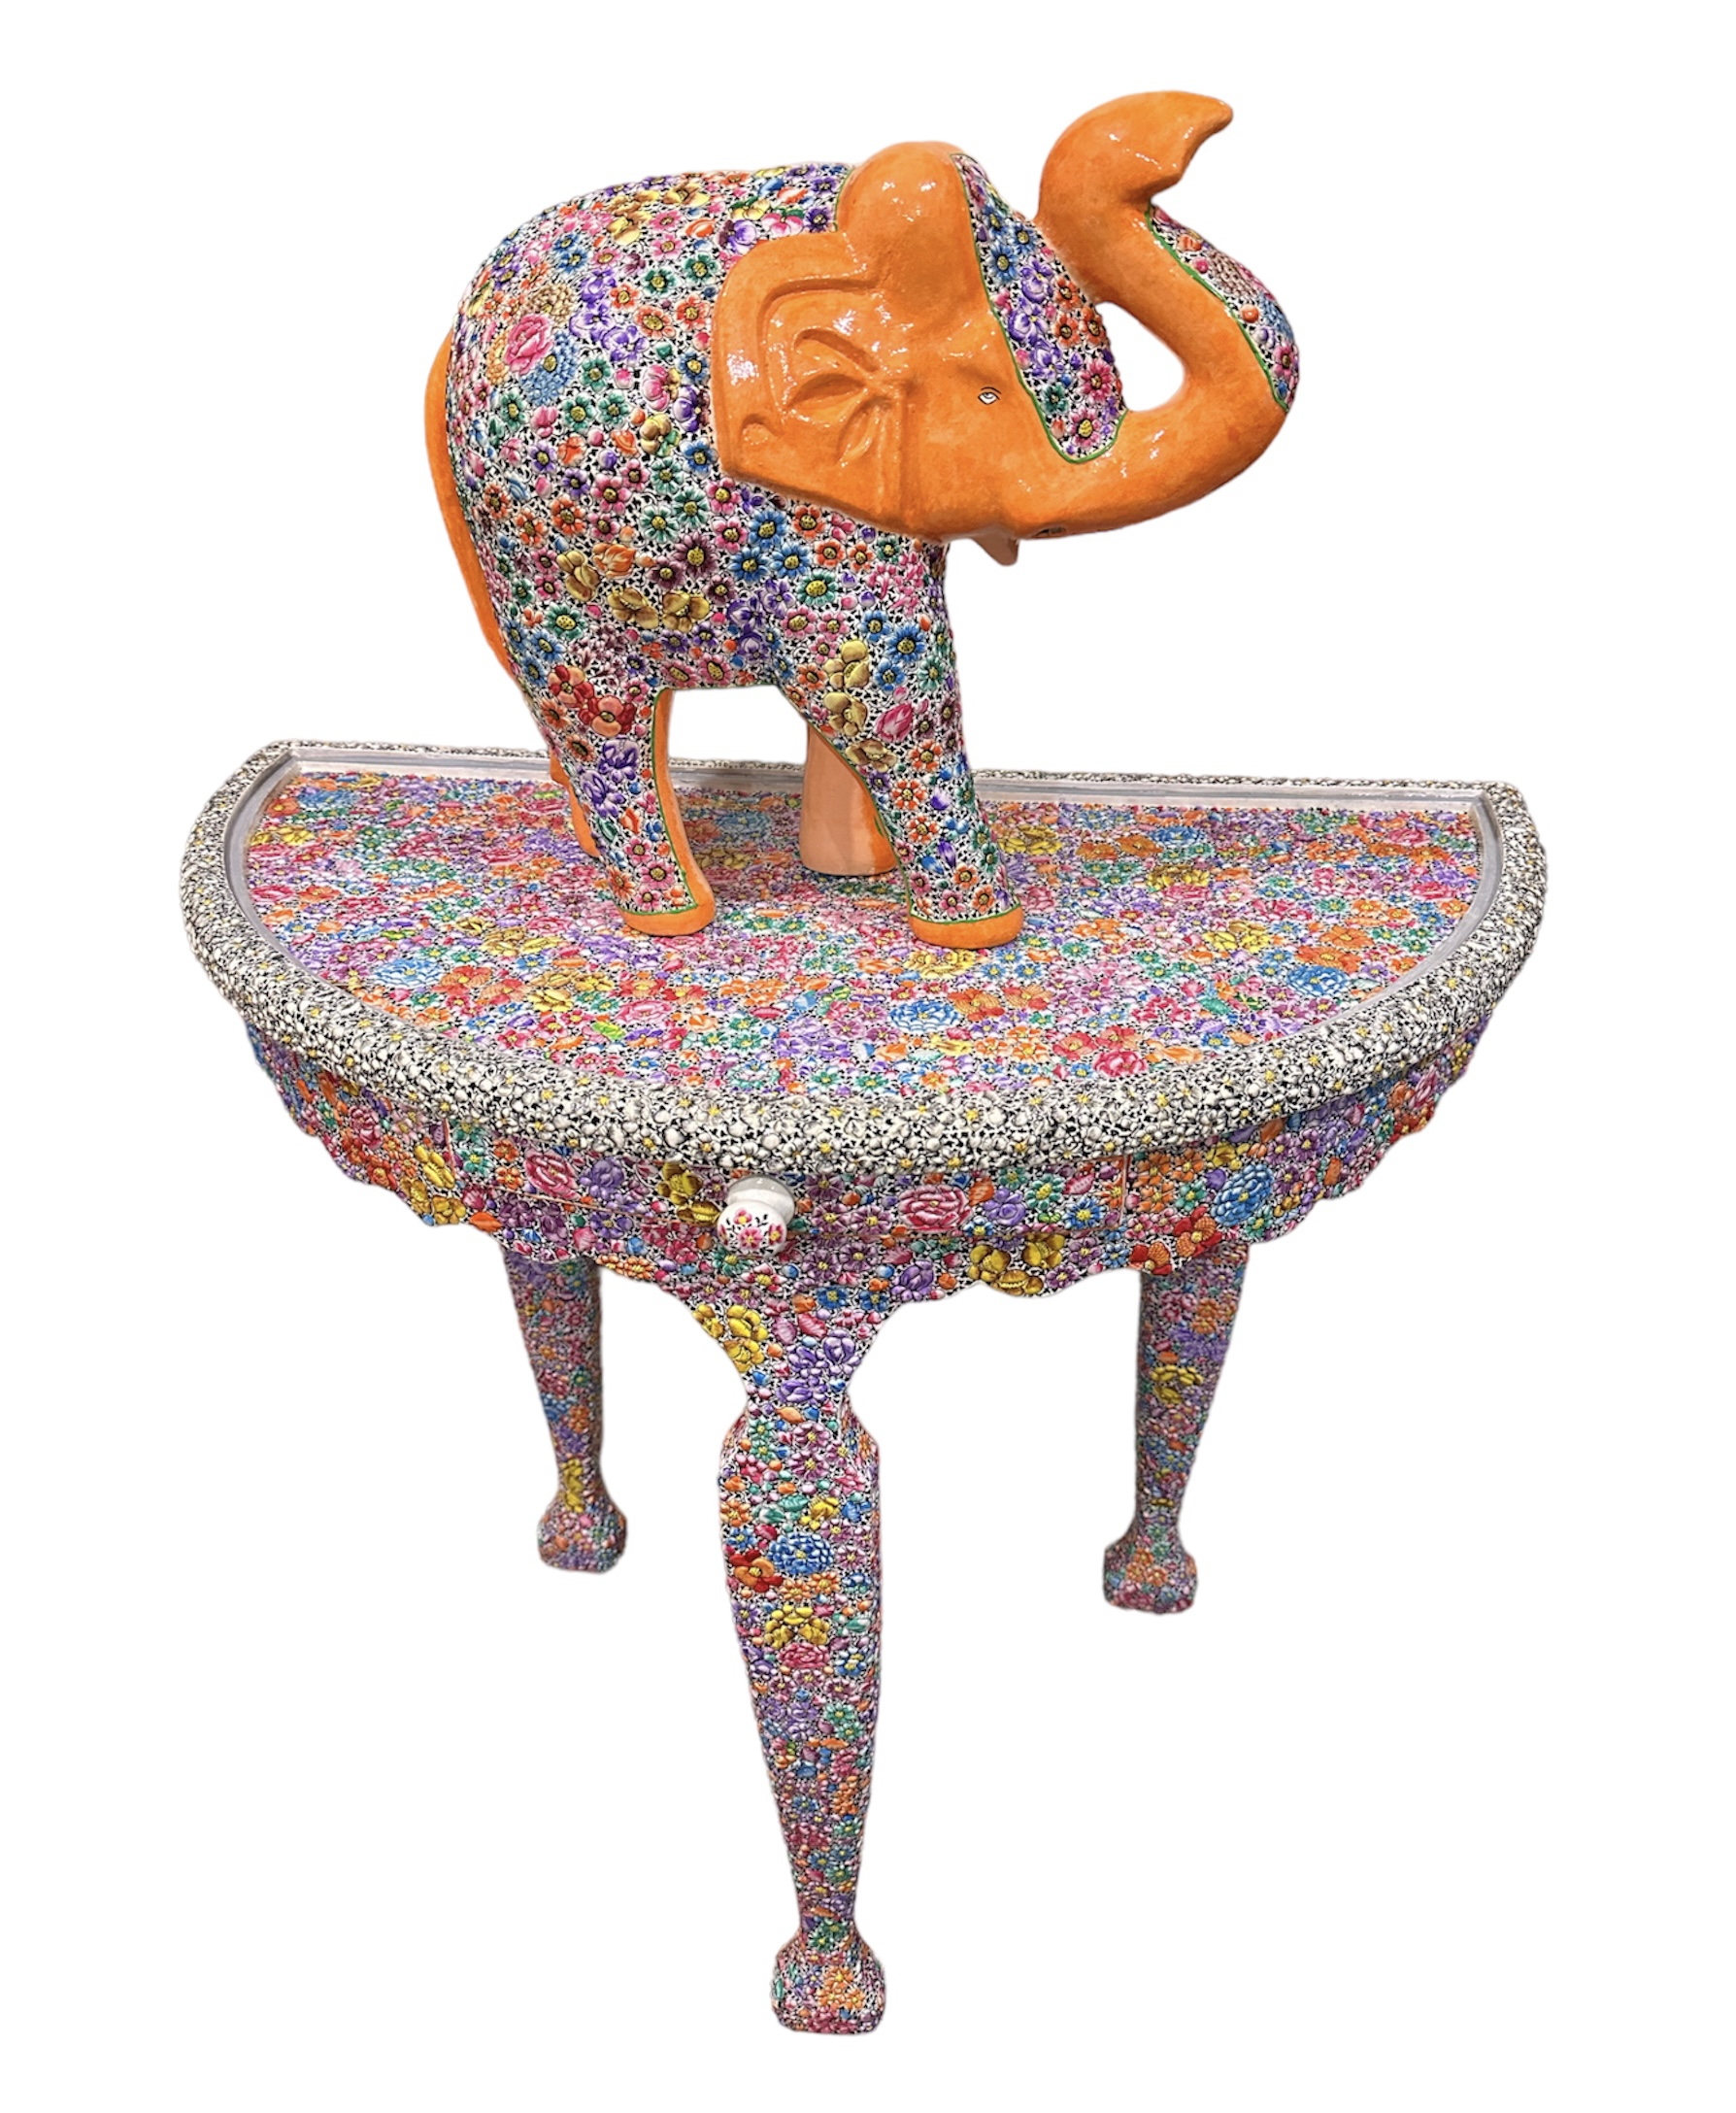 Handmade Paper Mache Elephants from Baba Art and Crafts